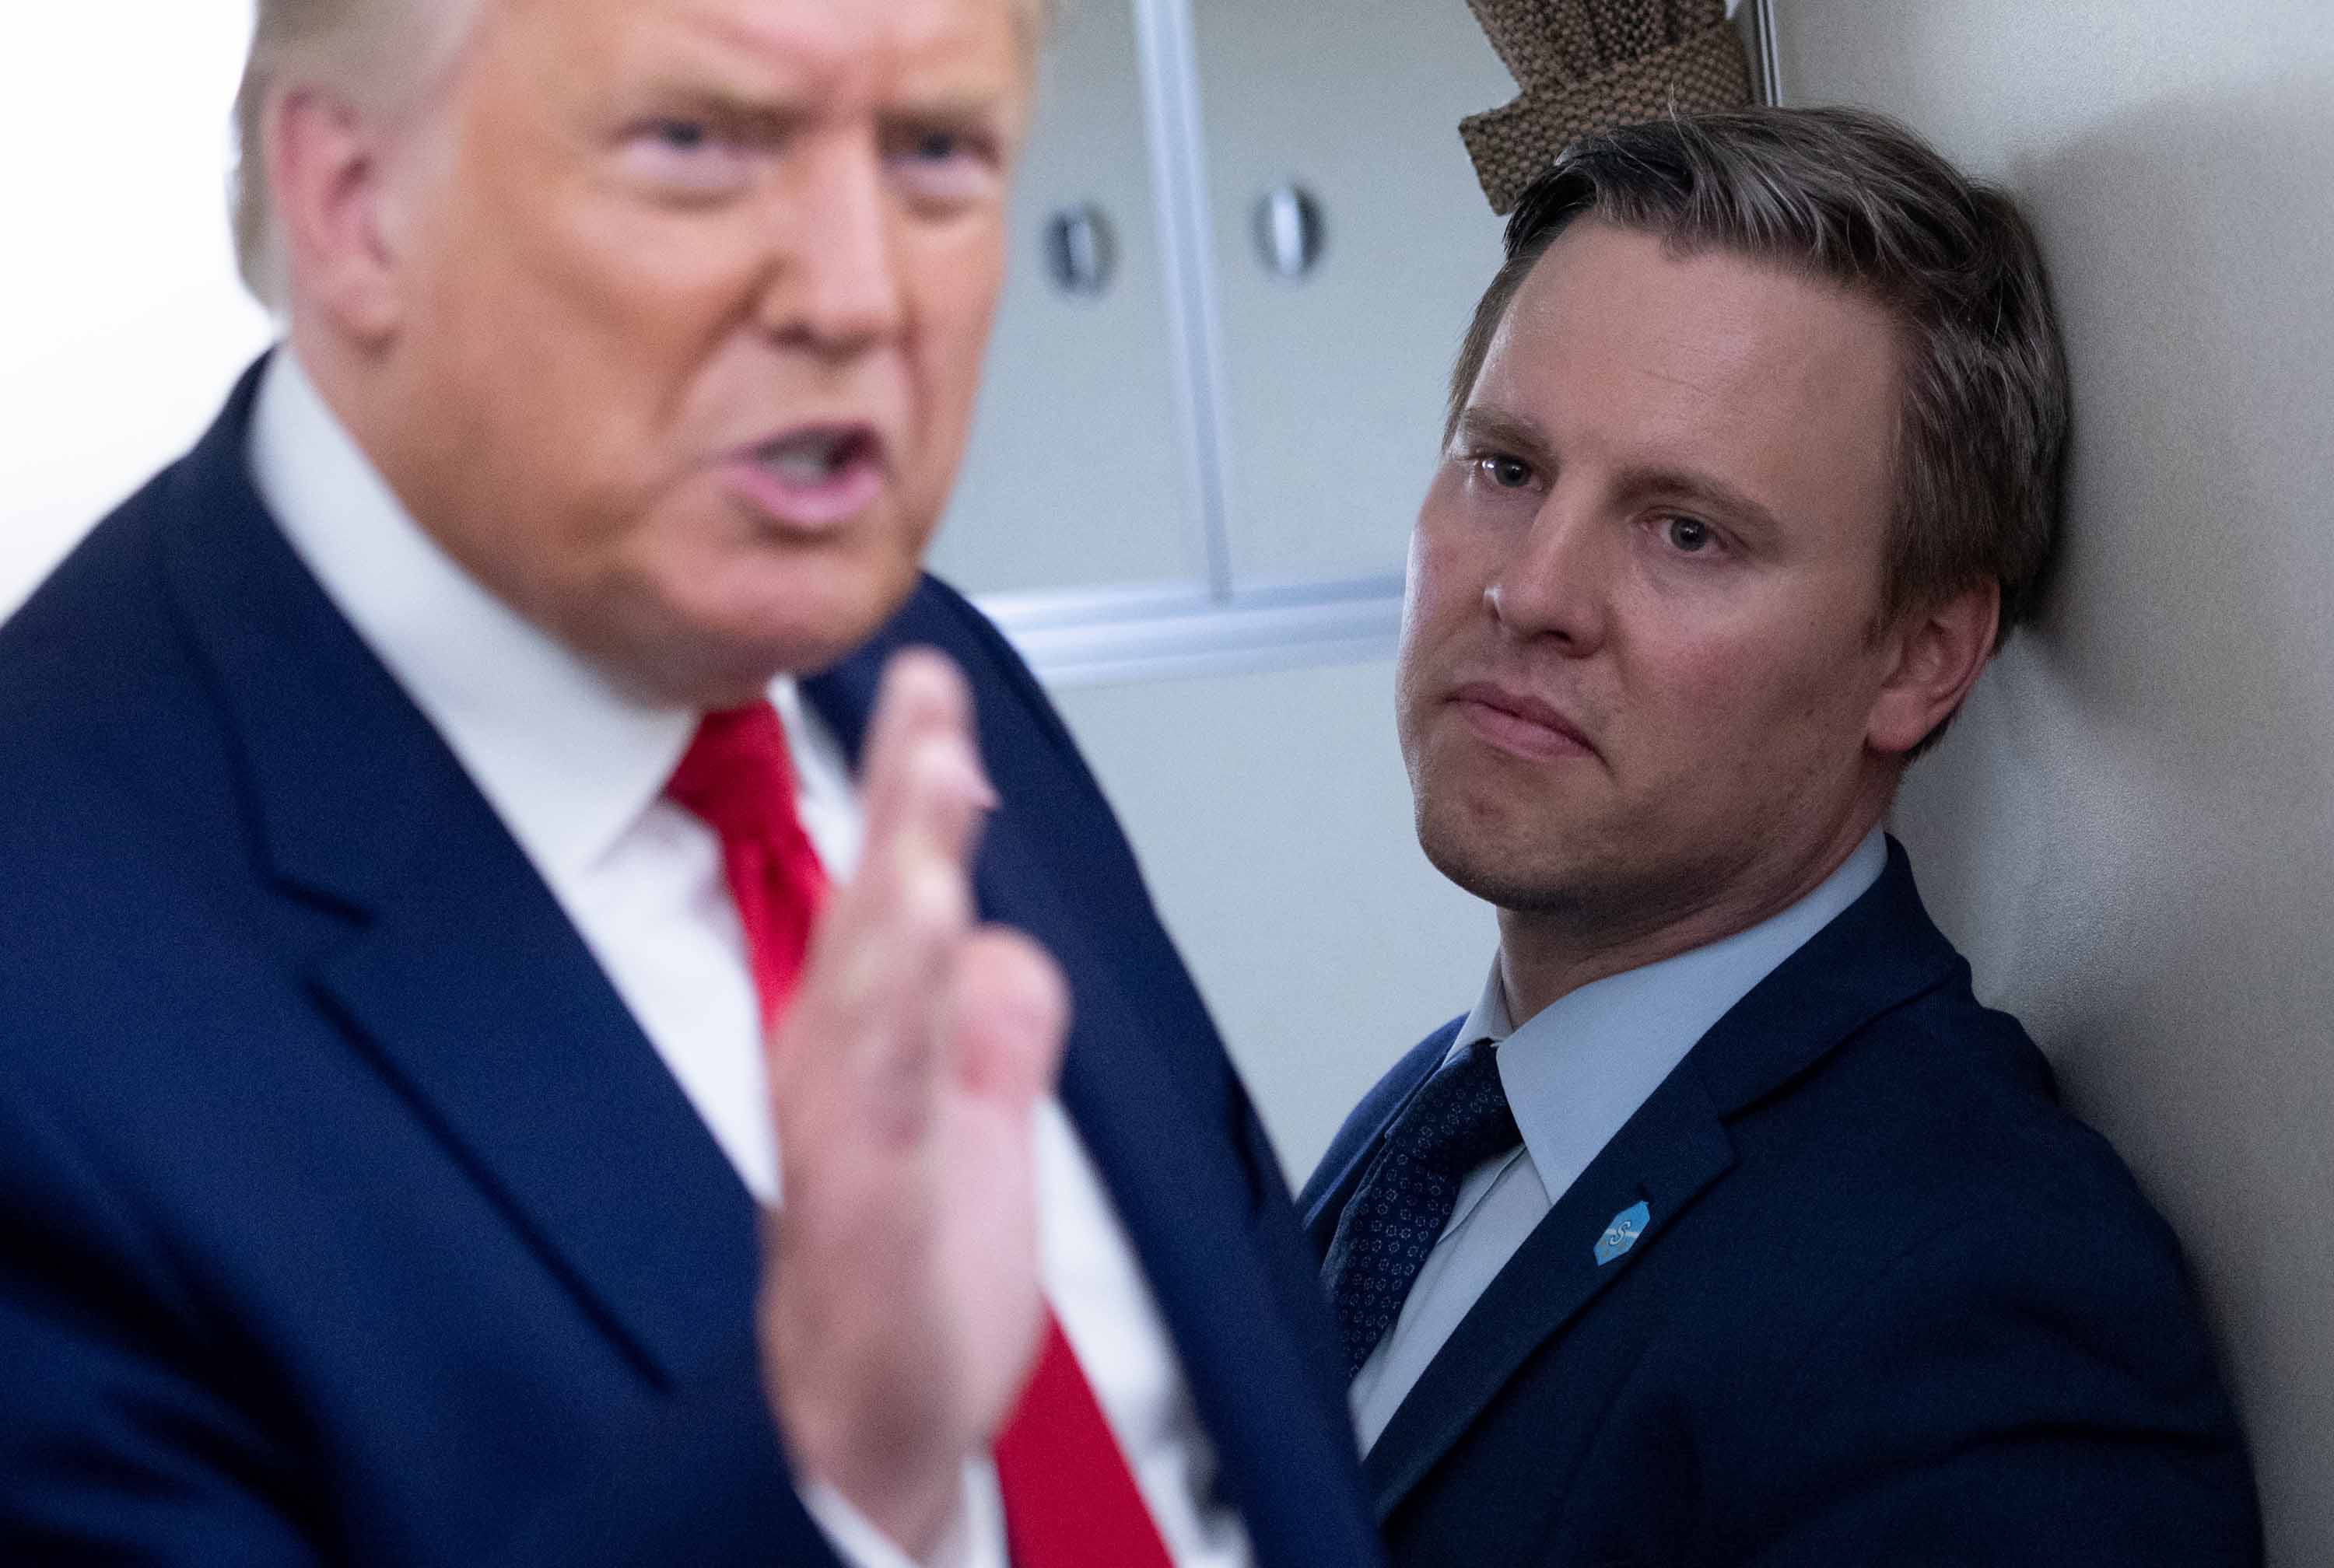 Campaign manager Bill Stepien is pictured alongside President Trump as he speaks with reporters aboard Air Force One on August 28.